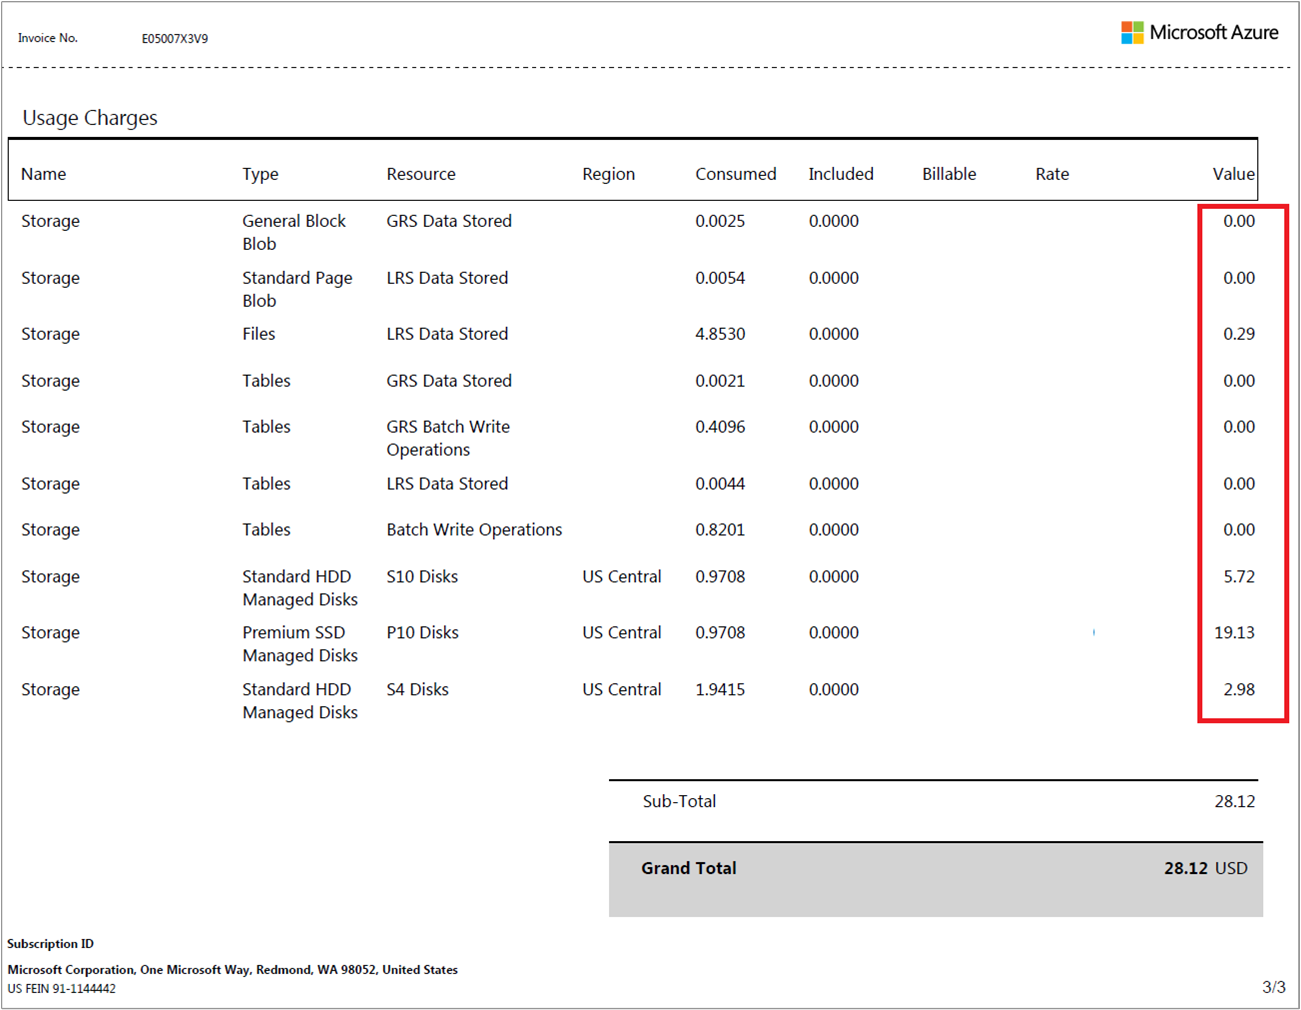 Screenshot showing usage charges in an invoice.